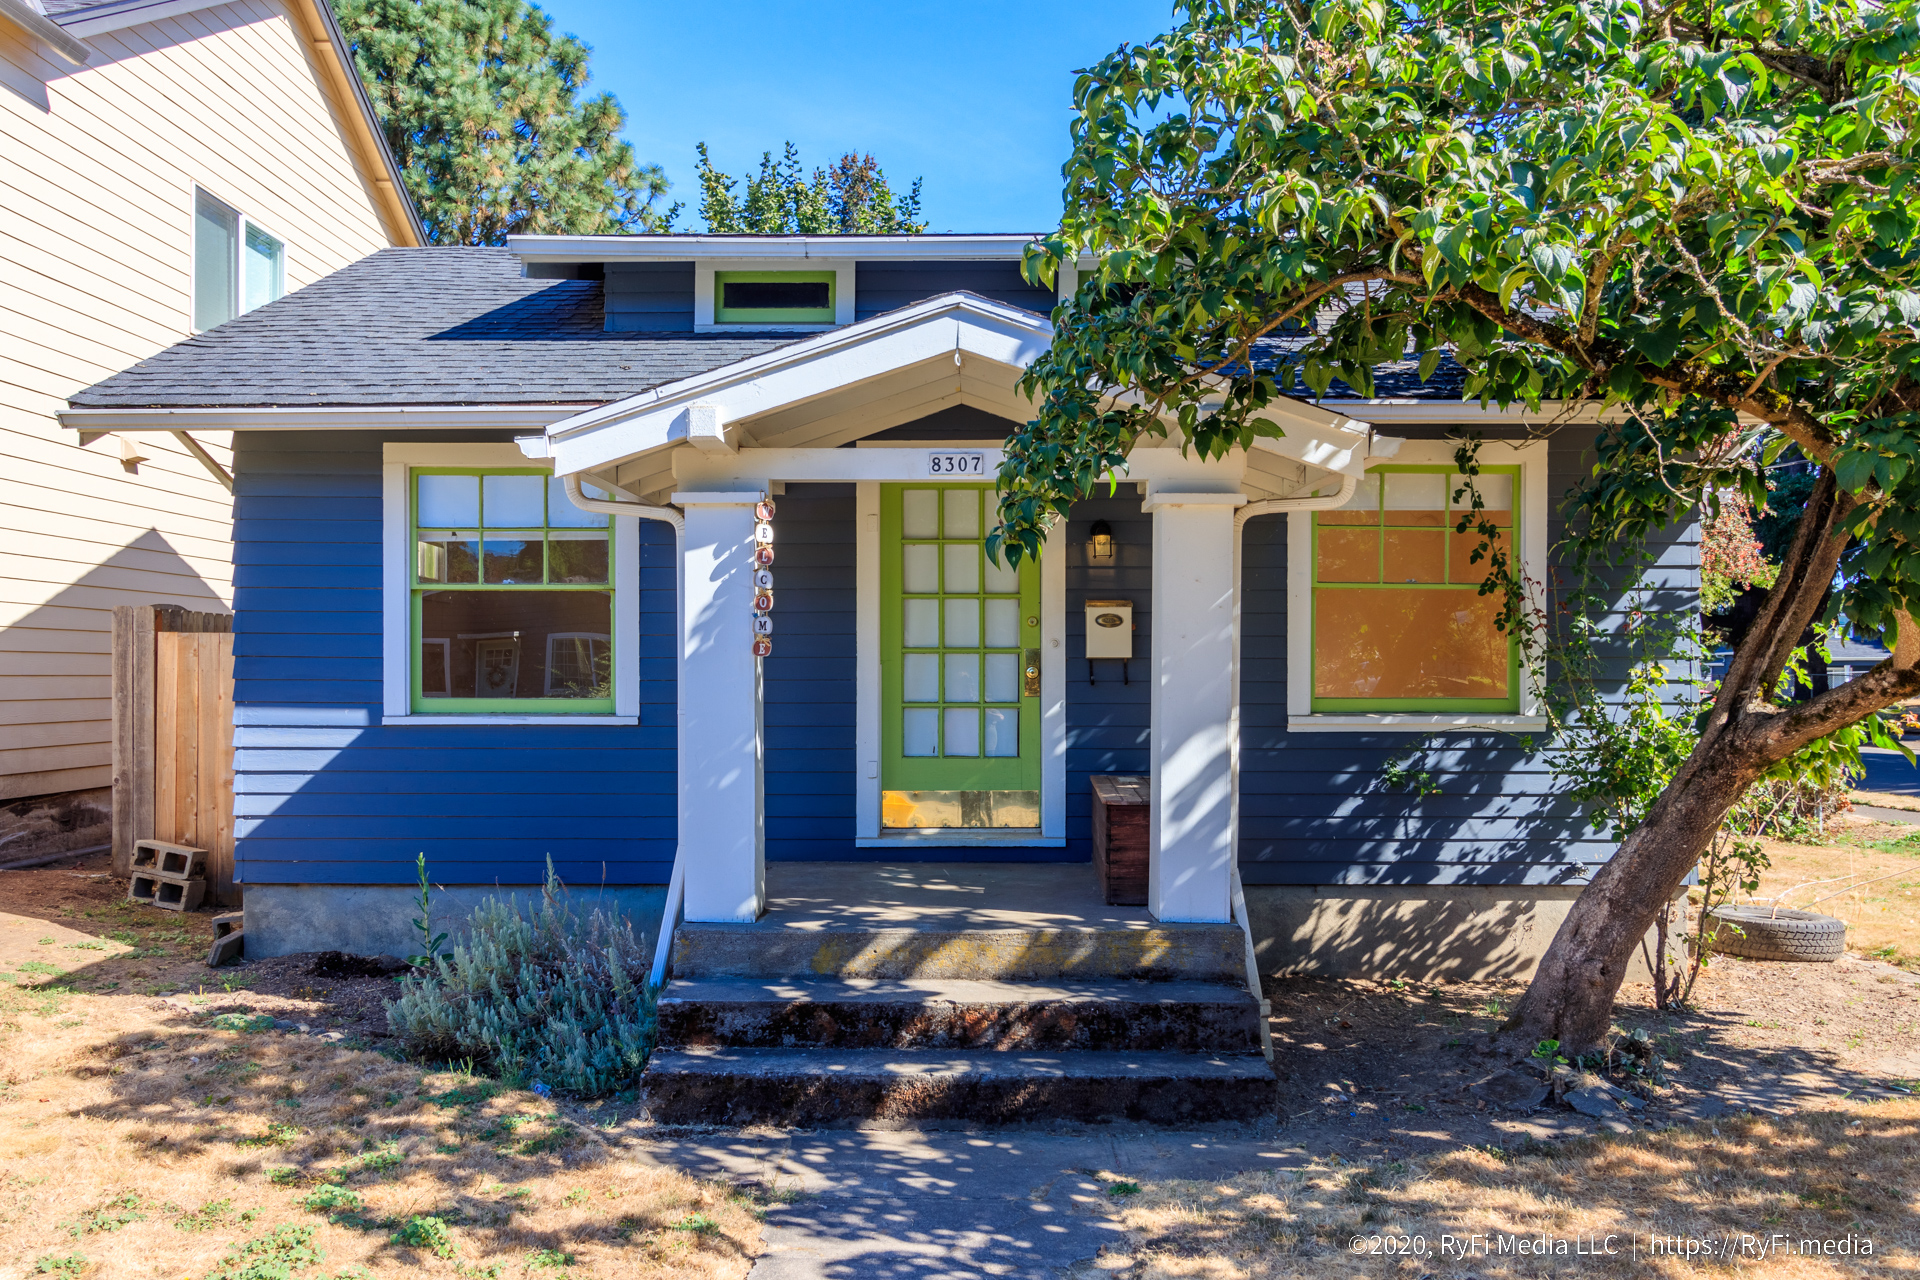 SOLD for $315,000 in 6 DOM! 8307 N Olympia St., Portland 97203